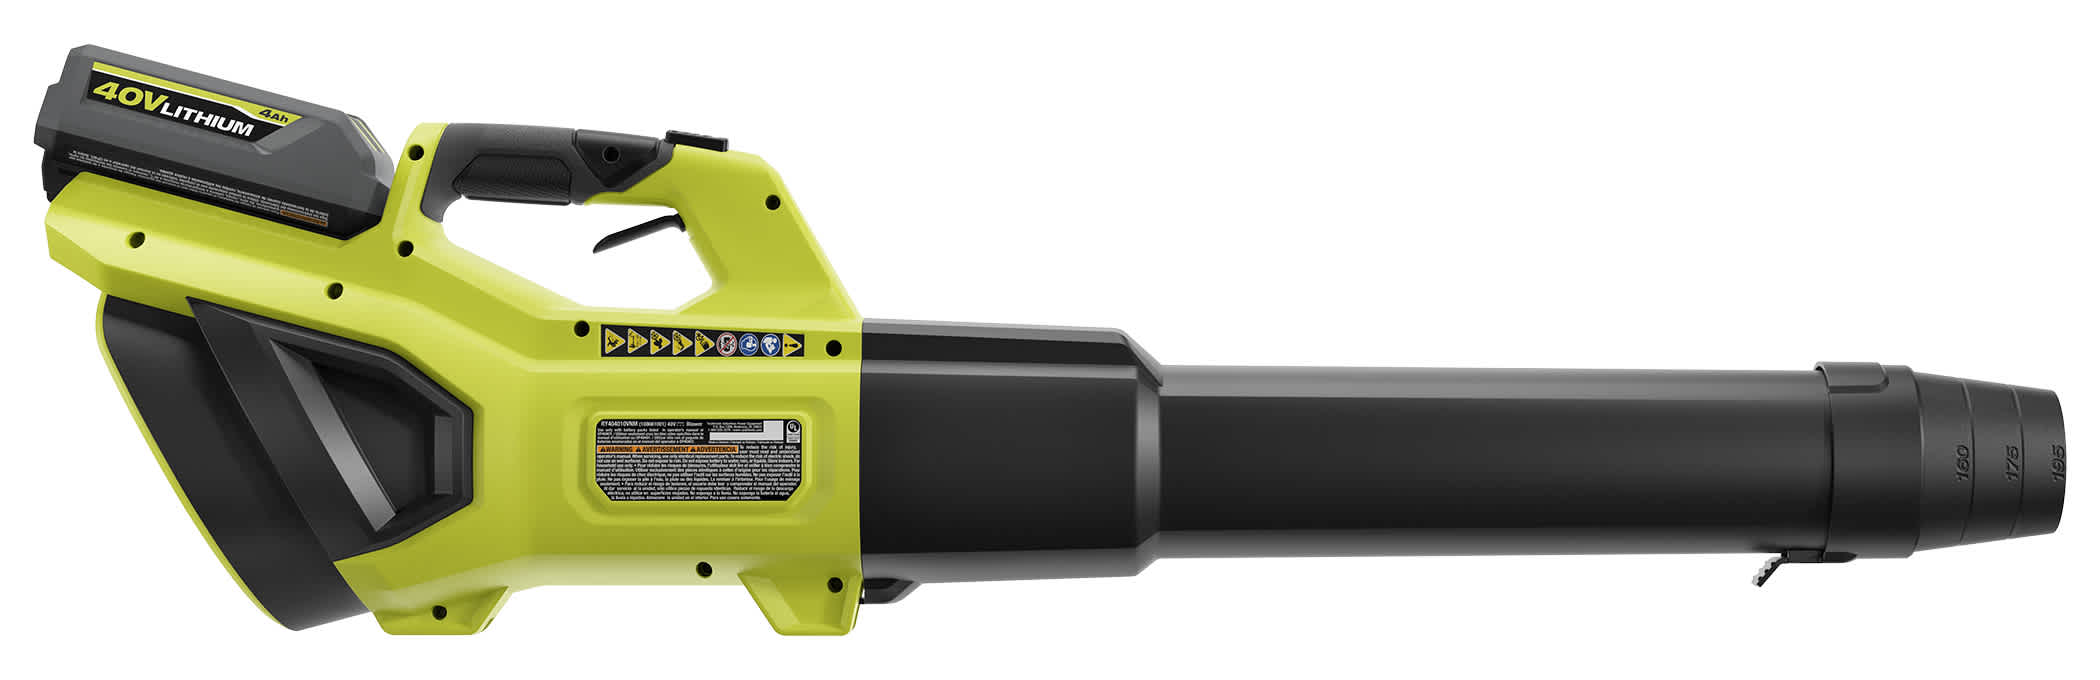 Product Features Image for 40V HP BRUSHLESS 730 CFM WHISPER SERIES BLOWER WITH (2) 4AH BATTERIES.